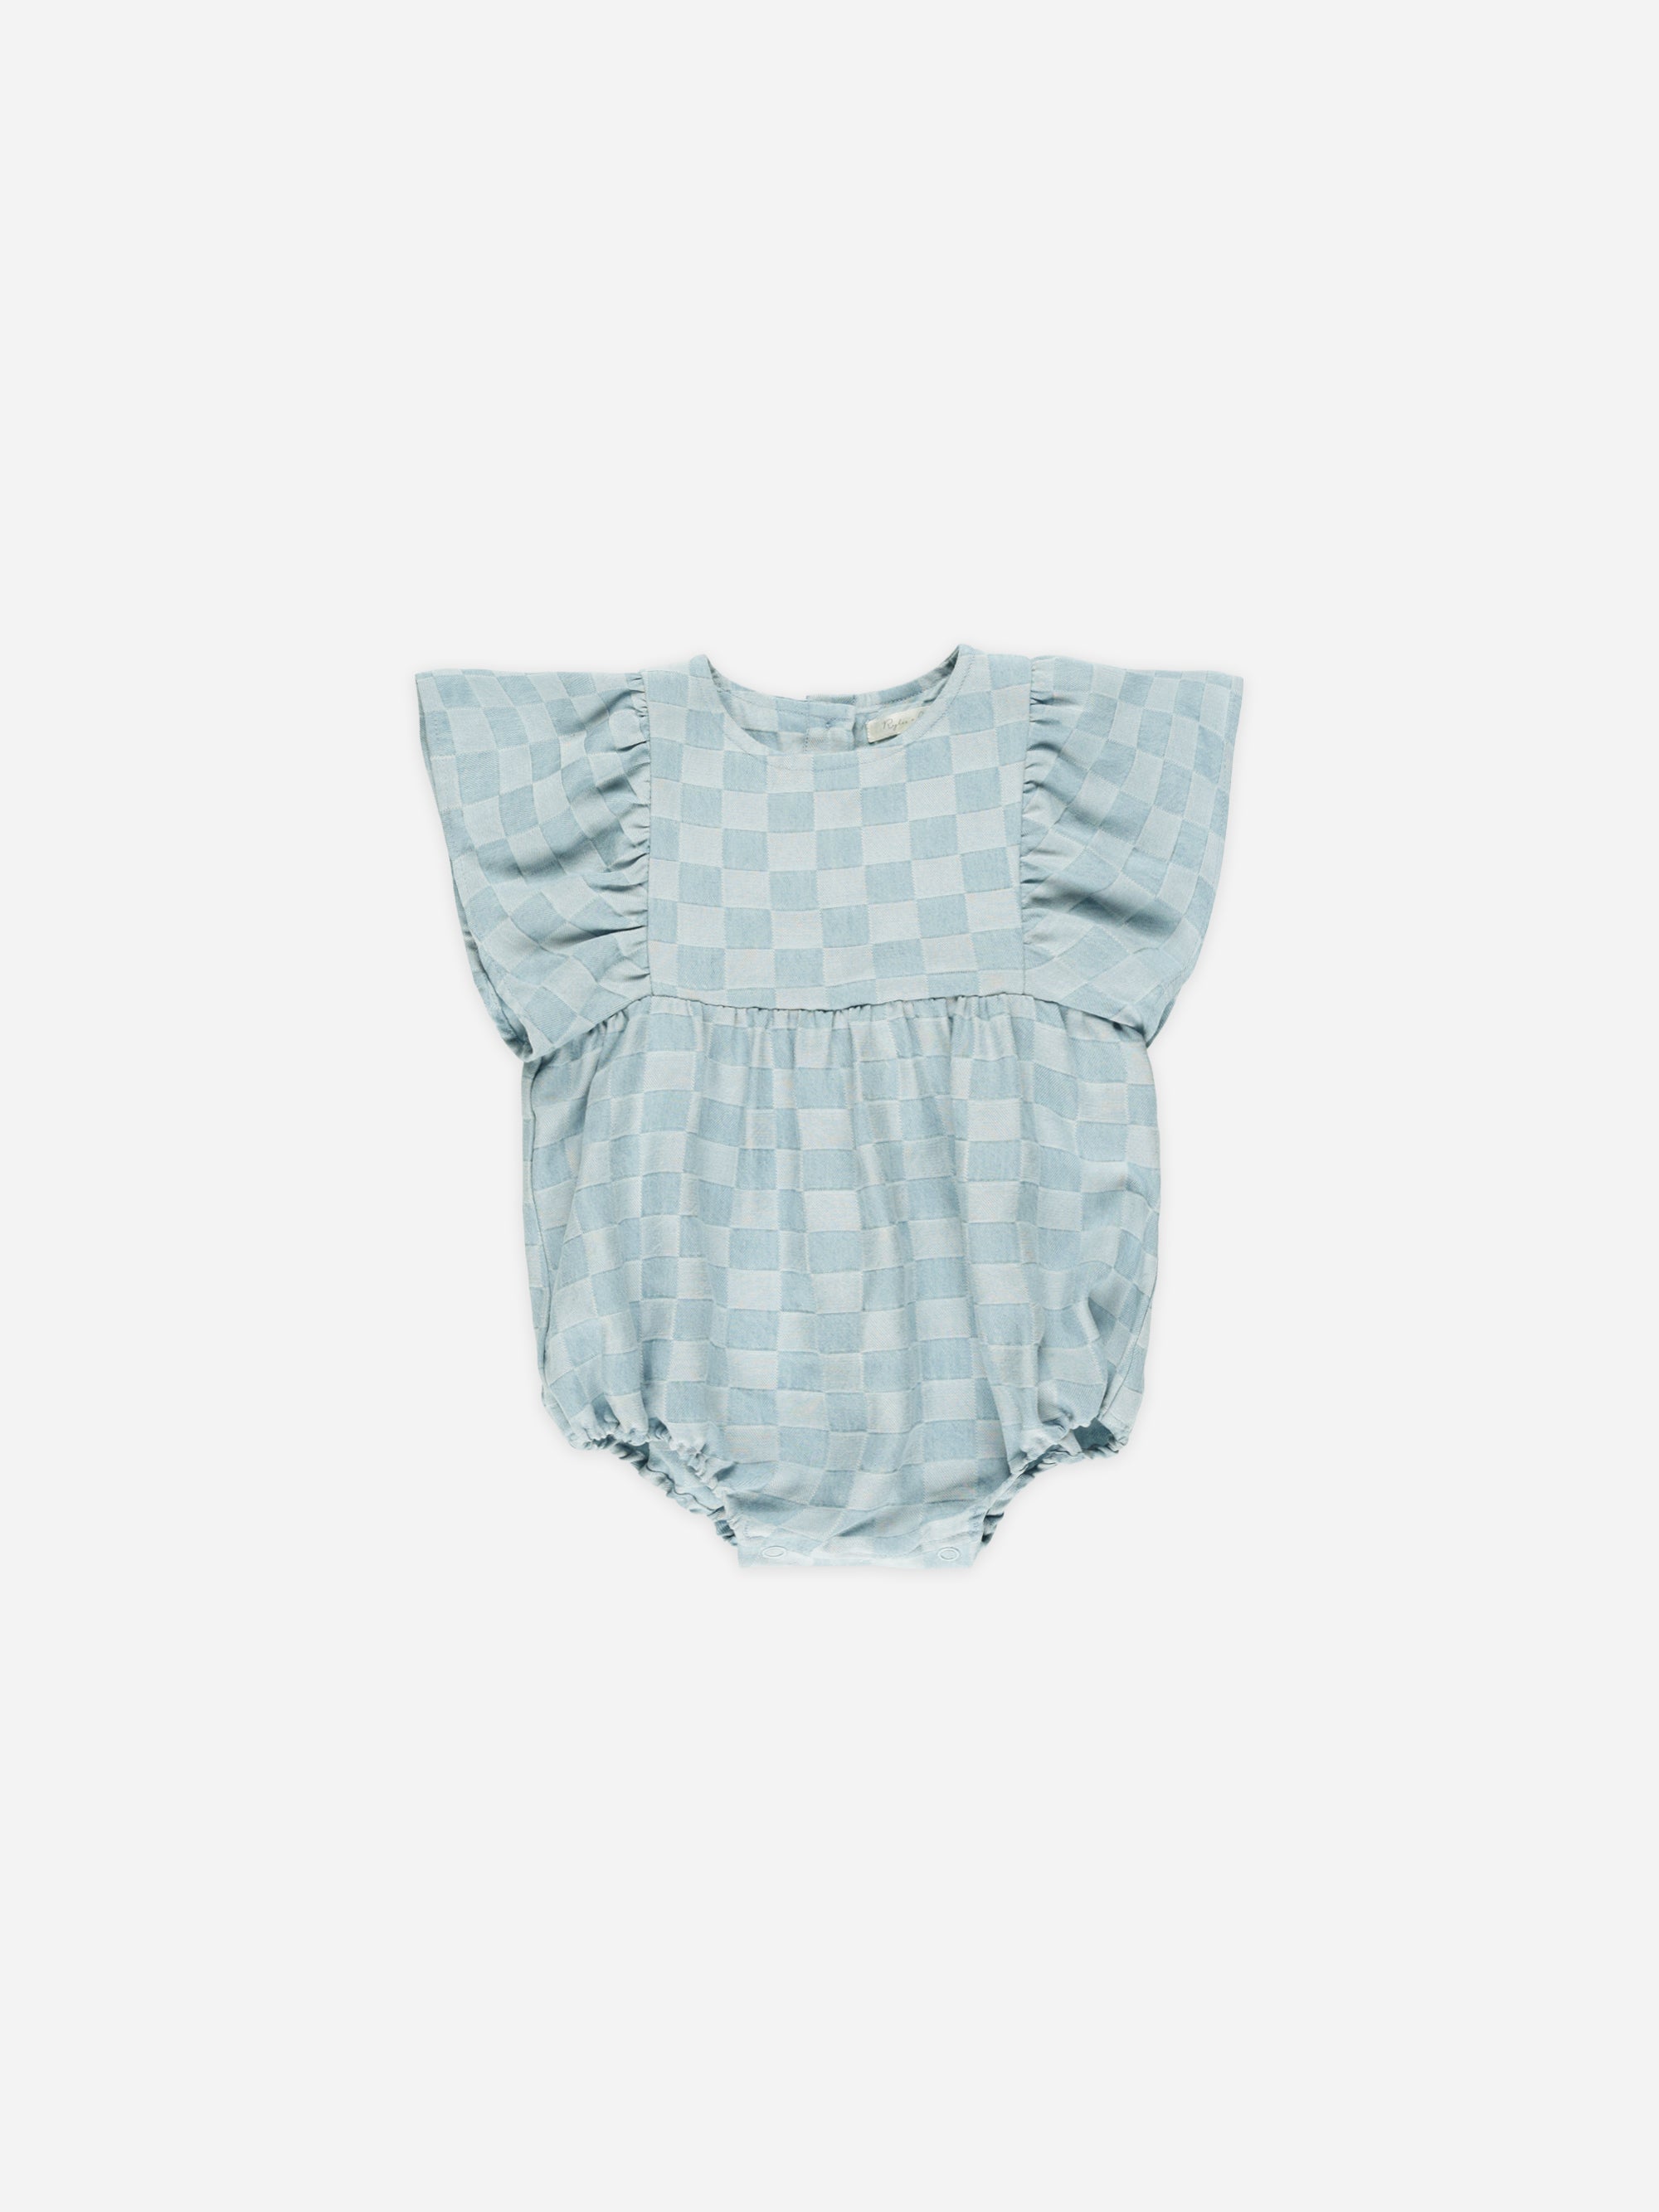 Kalea Romper || Blue Check - Rylee + Cru | Kids Clothes | Trendy Baby Clothes | Modern Infant Outfits |